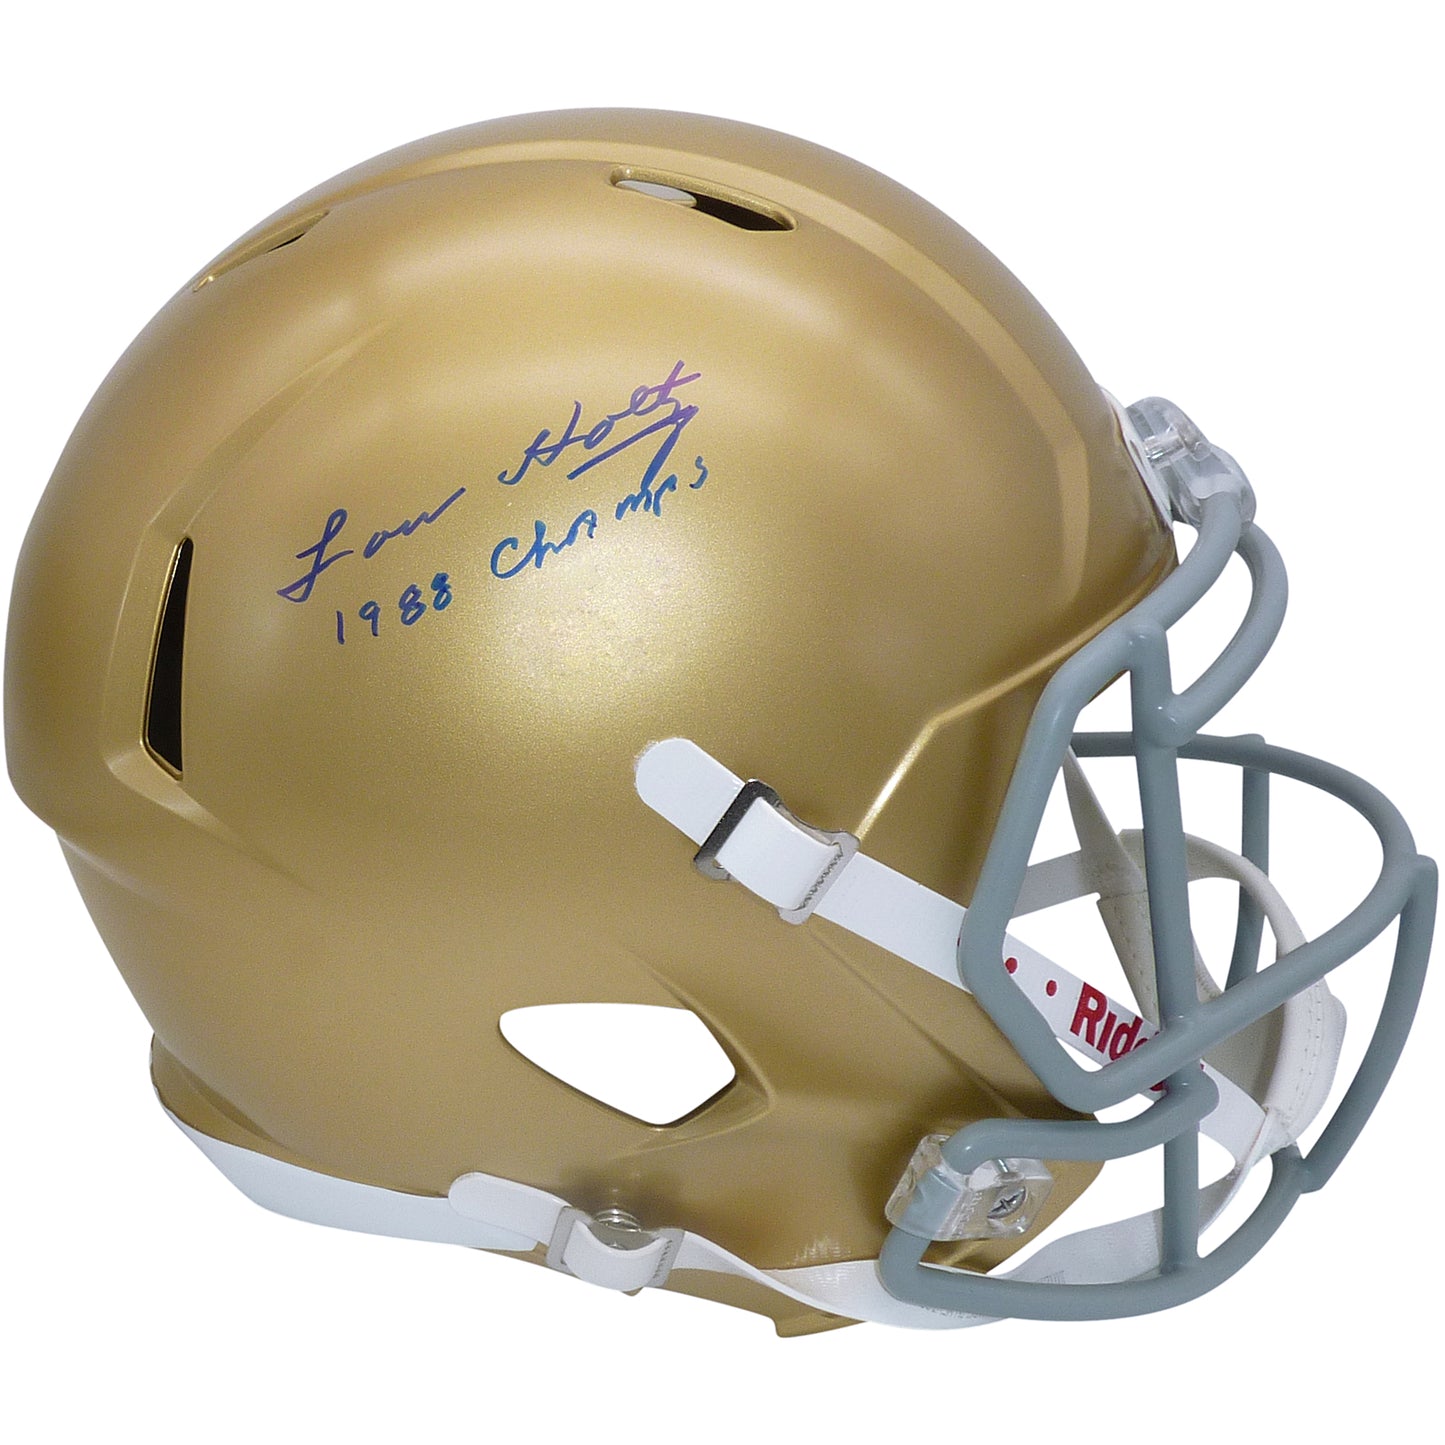 Lou Holtz Autographed Notre Dame Fighting Irish Deluxe Full-Size Replica Helmet w/ 88 National Champions - JSA